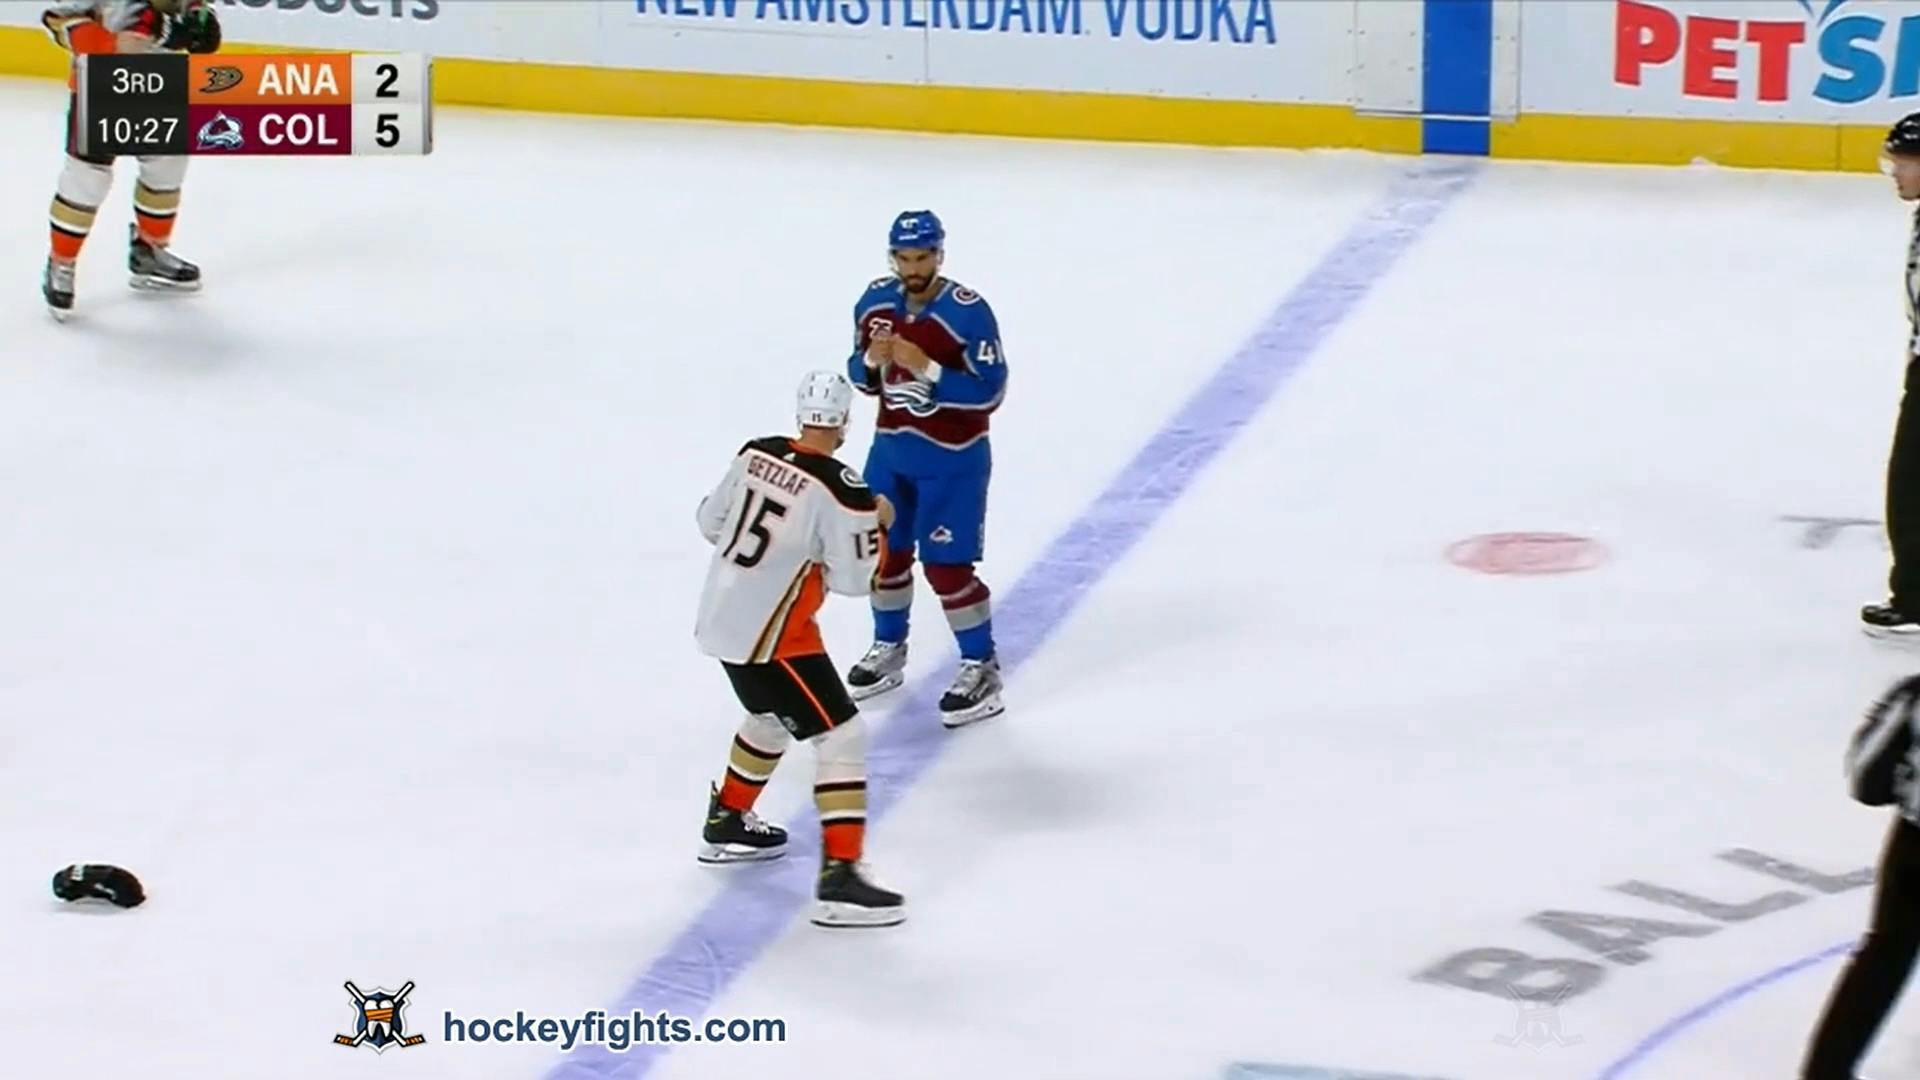 R. Getzlaf (ANA) vs. P. Bellemare (COL)